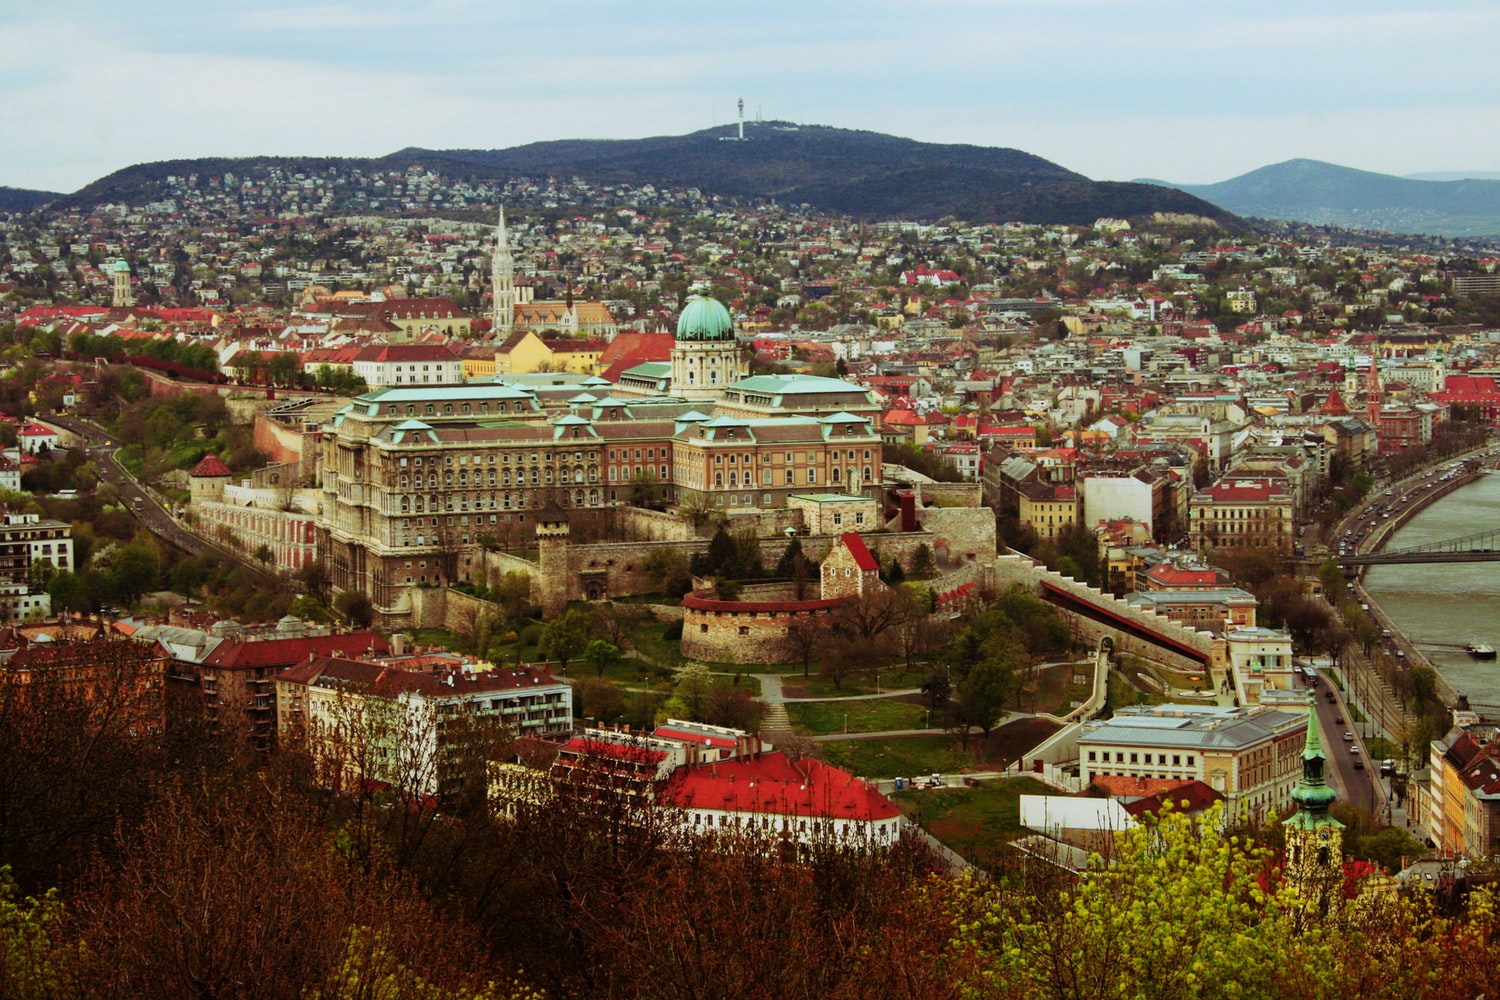 Discover Hidden Treasures Of The Buda Castle District With Minicards